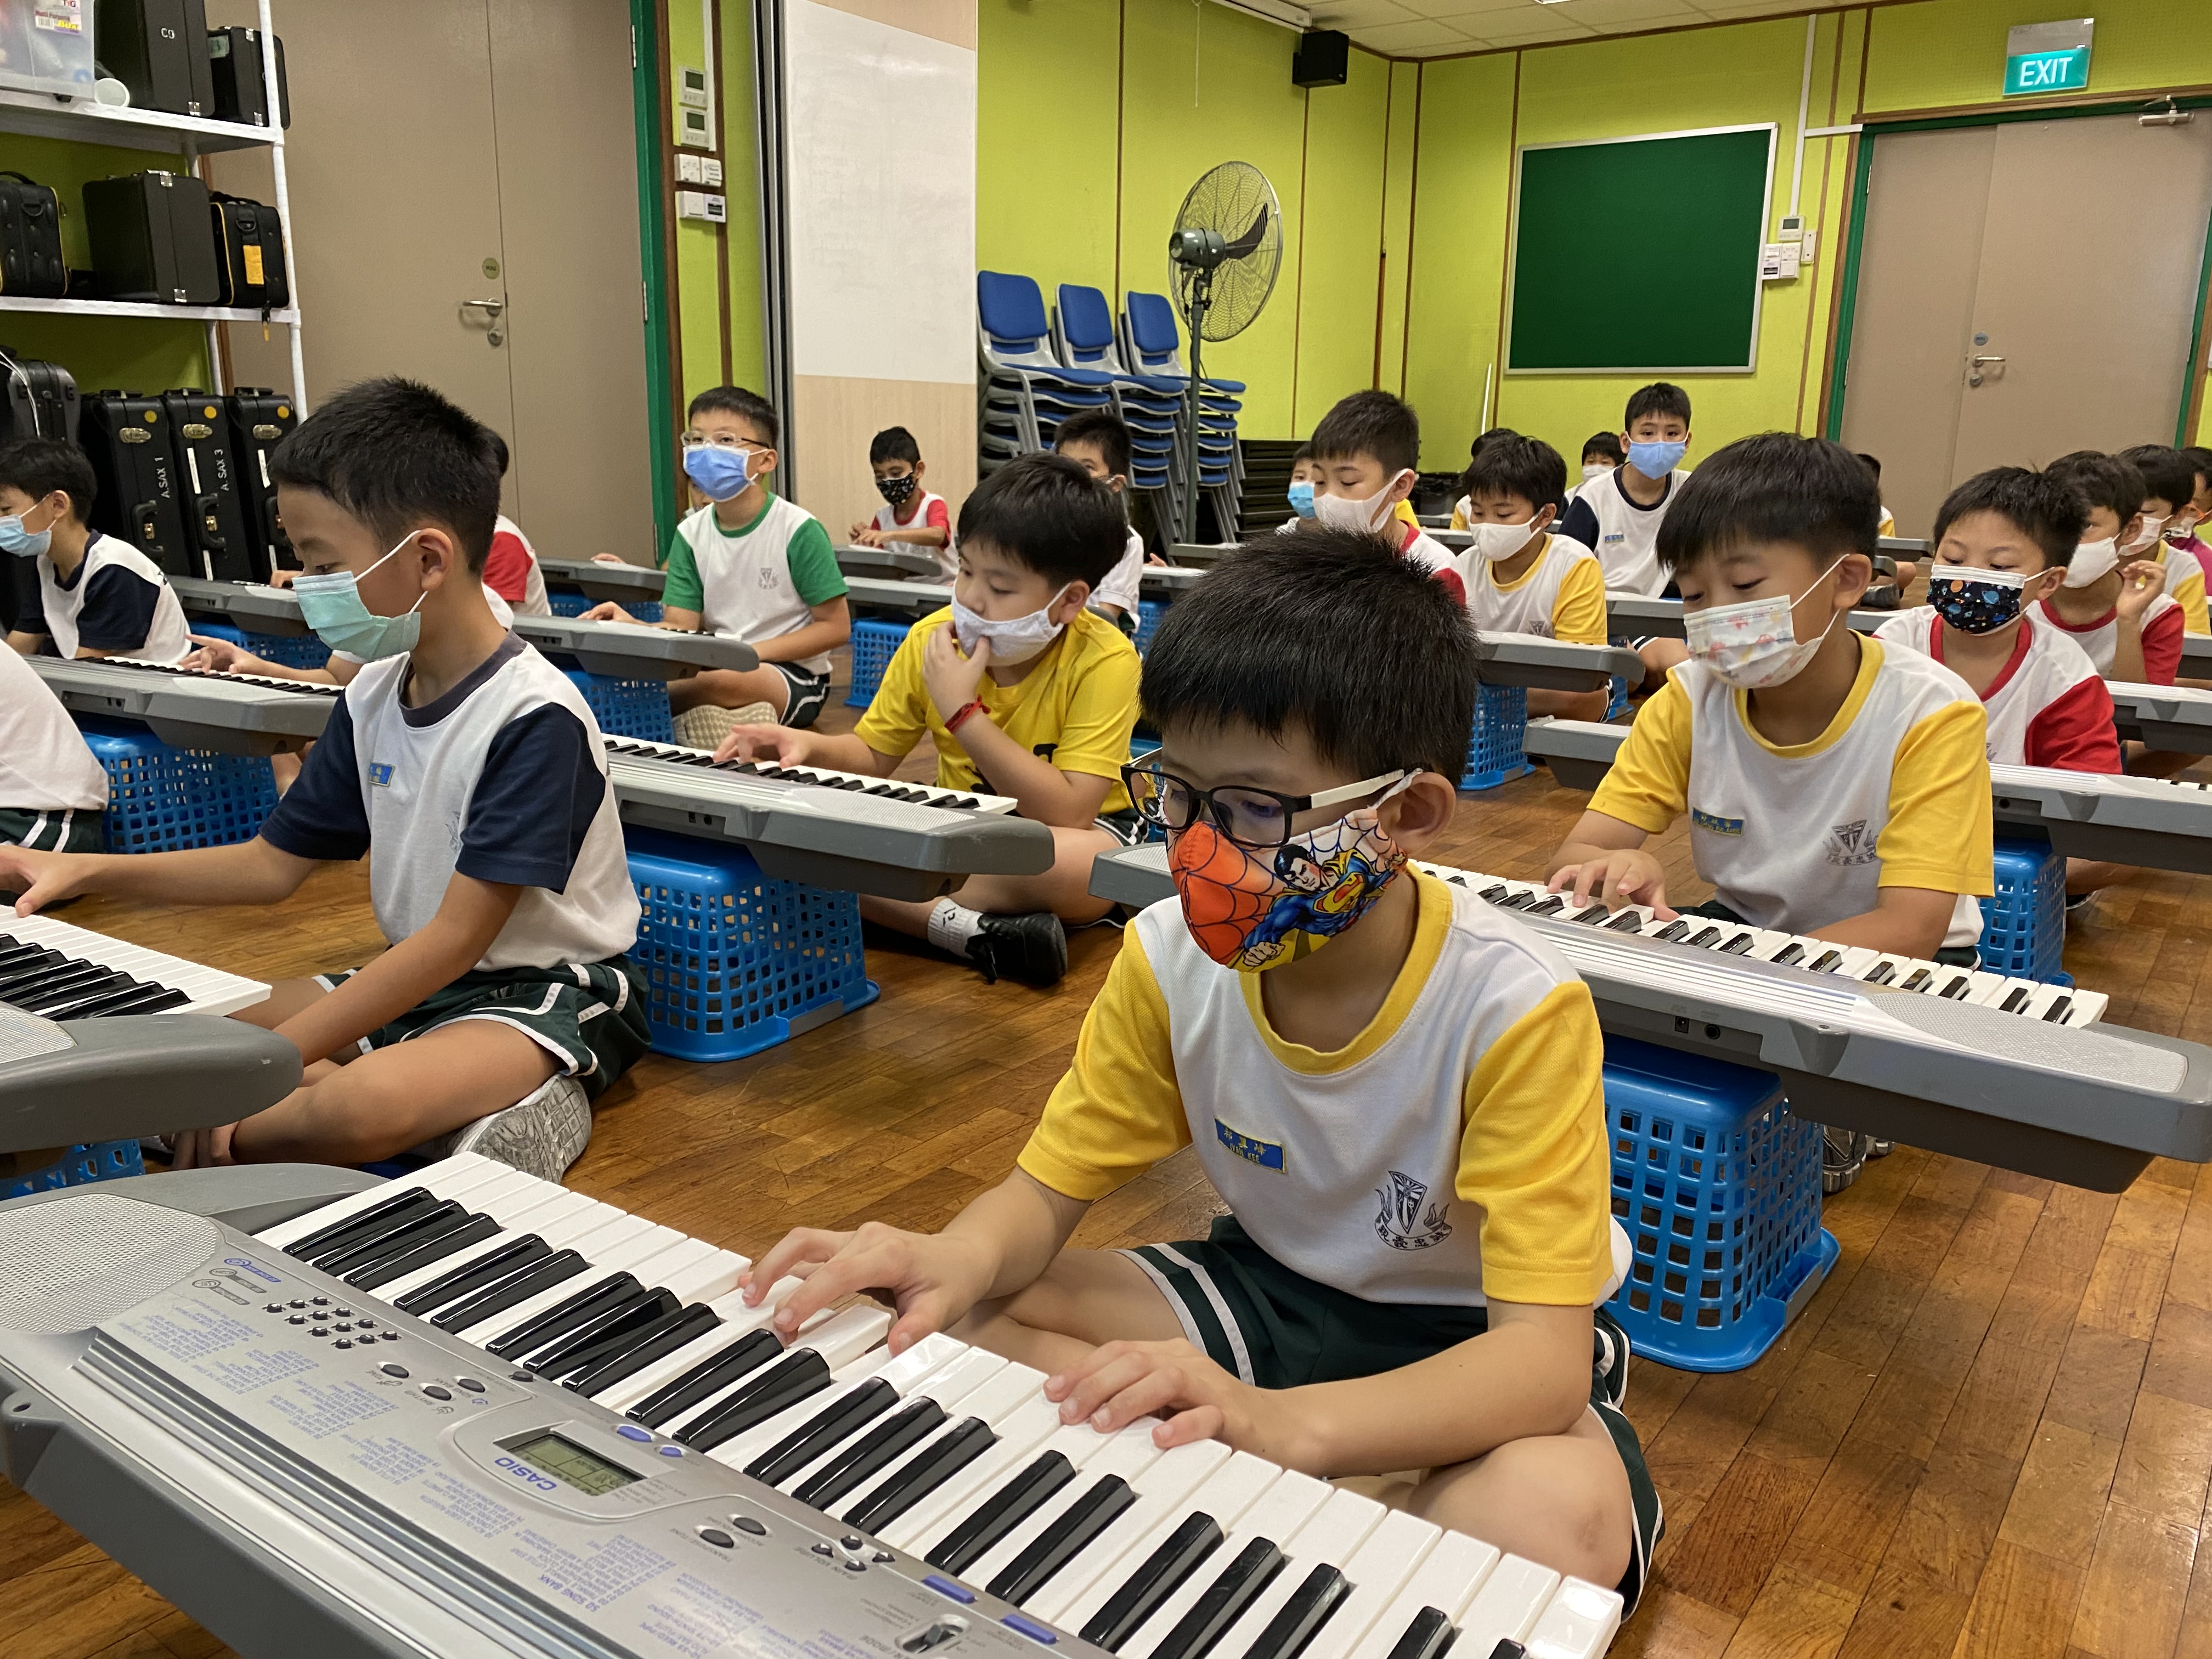 Primary 3 pupils learning to play the keyboard